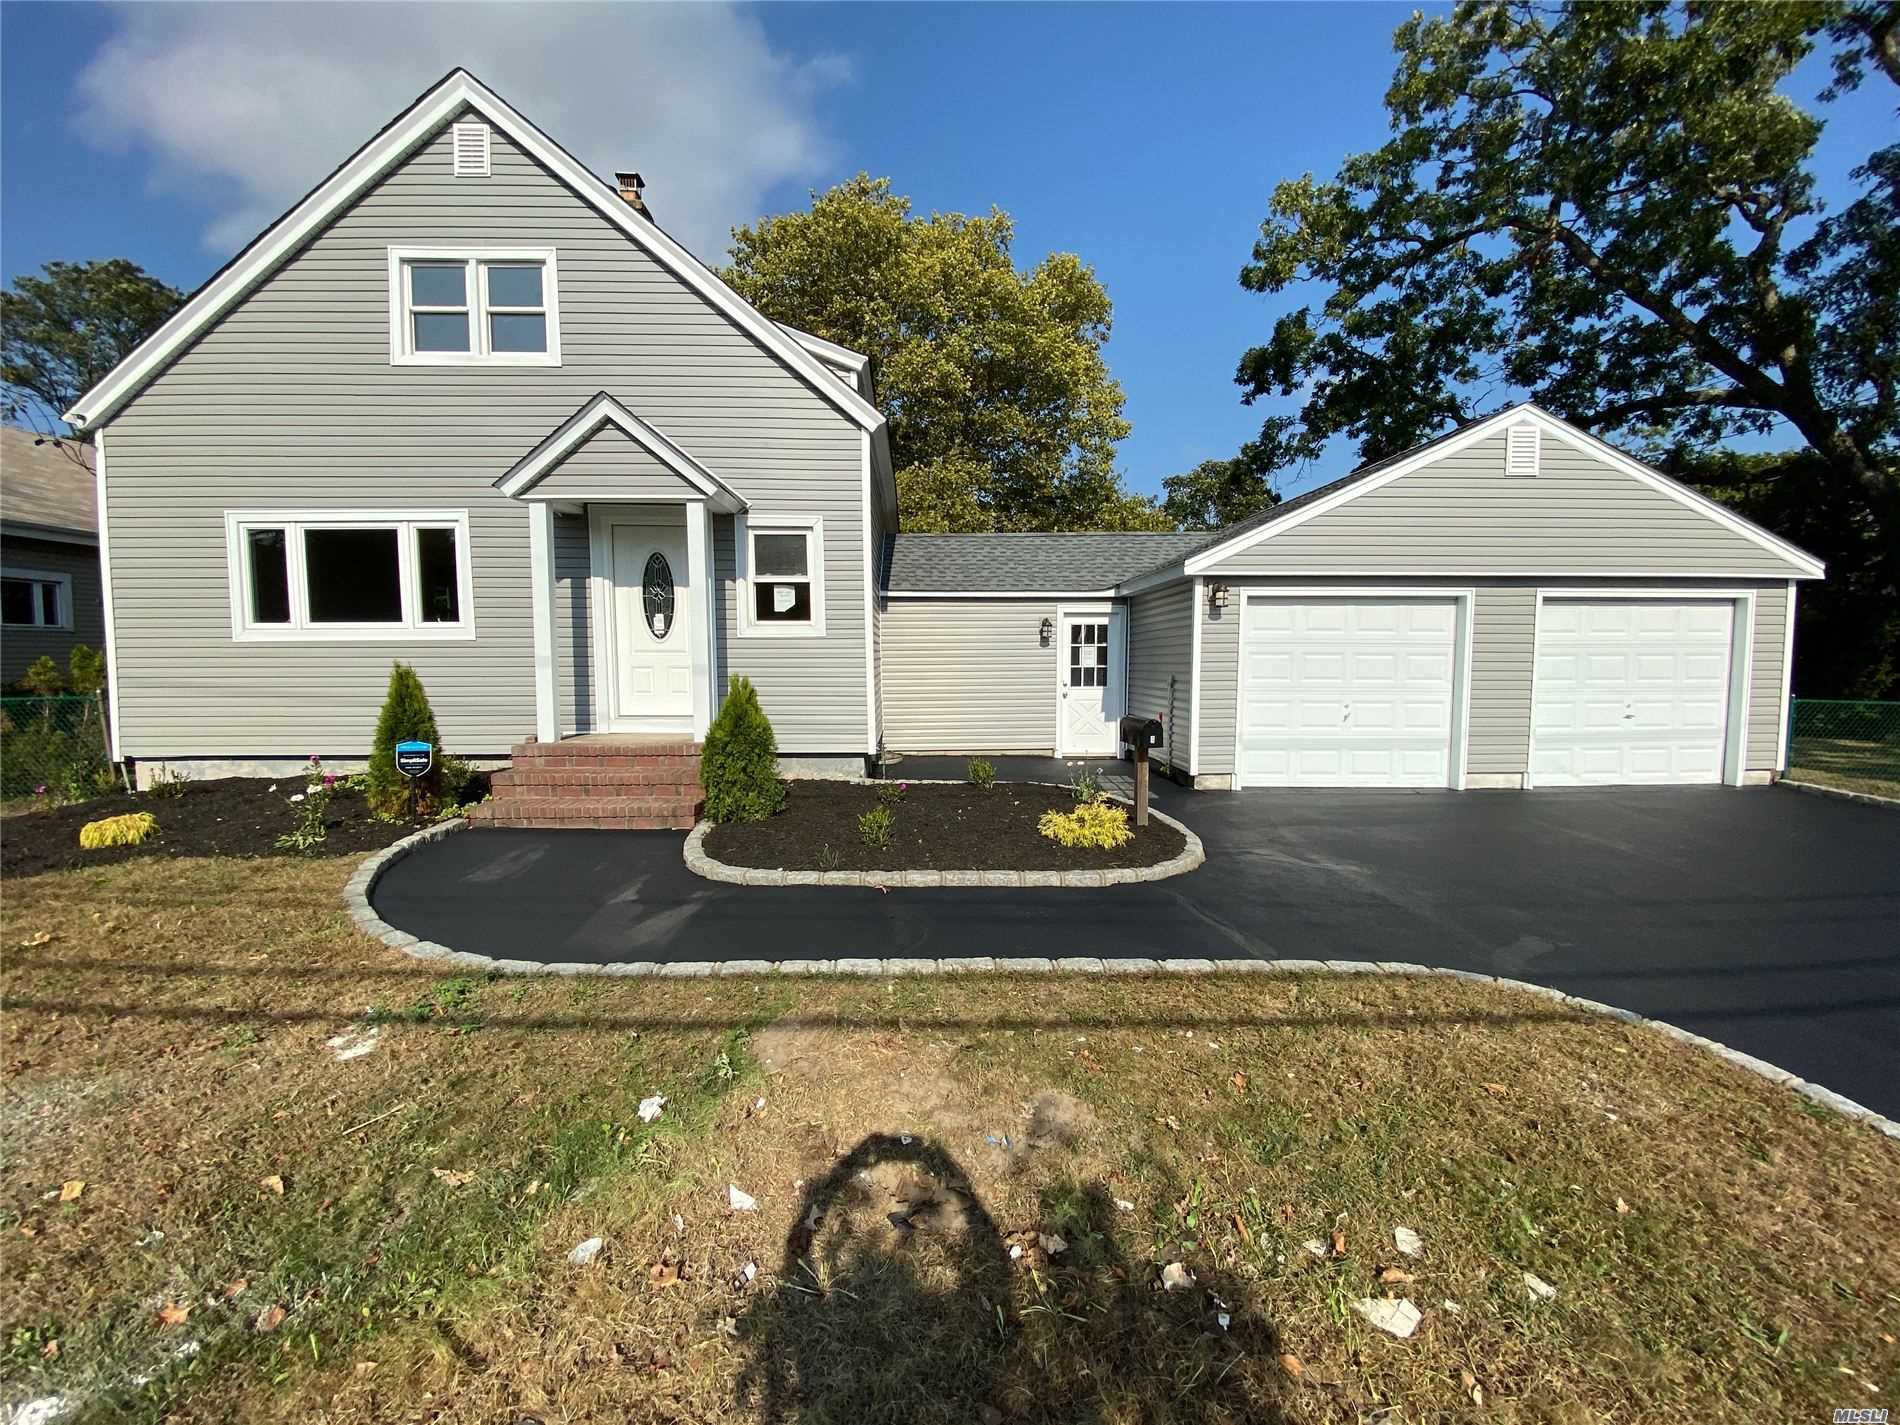 NEWLY RENOVATED COLONIAL AT 3 WEST DR BAY SHORE NY, 1RT FLOOR; LARGE LIVING R W/WOOD STOVE, F DINNING R, BED, F BATH, MODERN KITCHEN W/GRANITE COUNTER TOPS, SS APPLIANCES INCLUDED DISH WASHER, MICROW ETC 2ND FLOOR MASTER R W/F BATH, BED AND WIC, FINISHED GARAGE CAN BE REMOVED IF BUYERS WANTS (R, R, LR, FB, Seller no representa) LAUNDRY IN THE BASEMENT, OVERSIZED FLAT BACK YARD 12980 SF, W/PAVERS PATIO & WOOD DECK, NEW ROOF, WINDOWS, SIDING, CLOSE TO ALL HAS GAS, LOW TAX $8492 NO FLOOD INSURANCE !